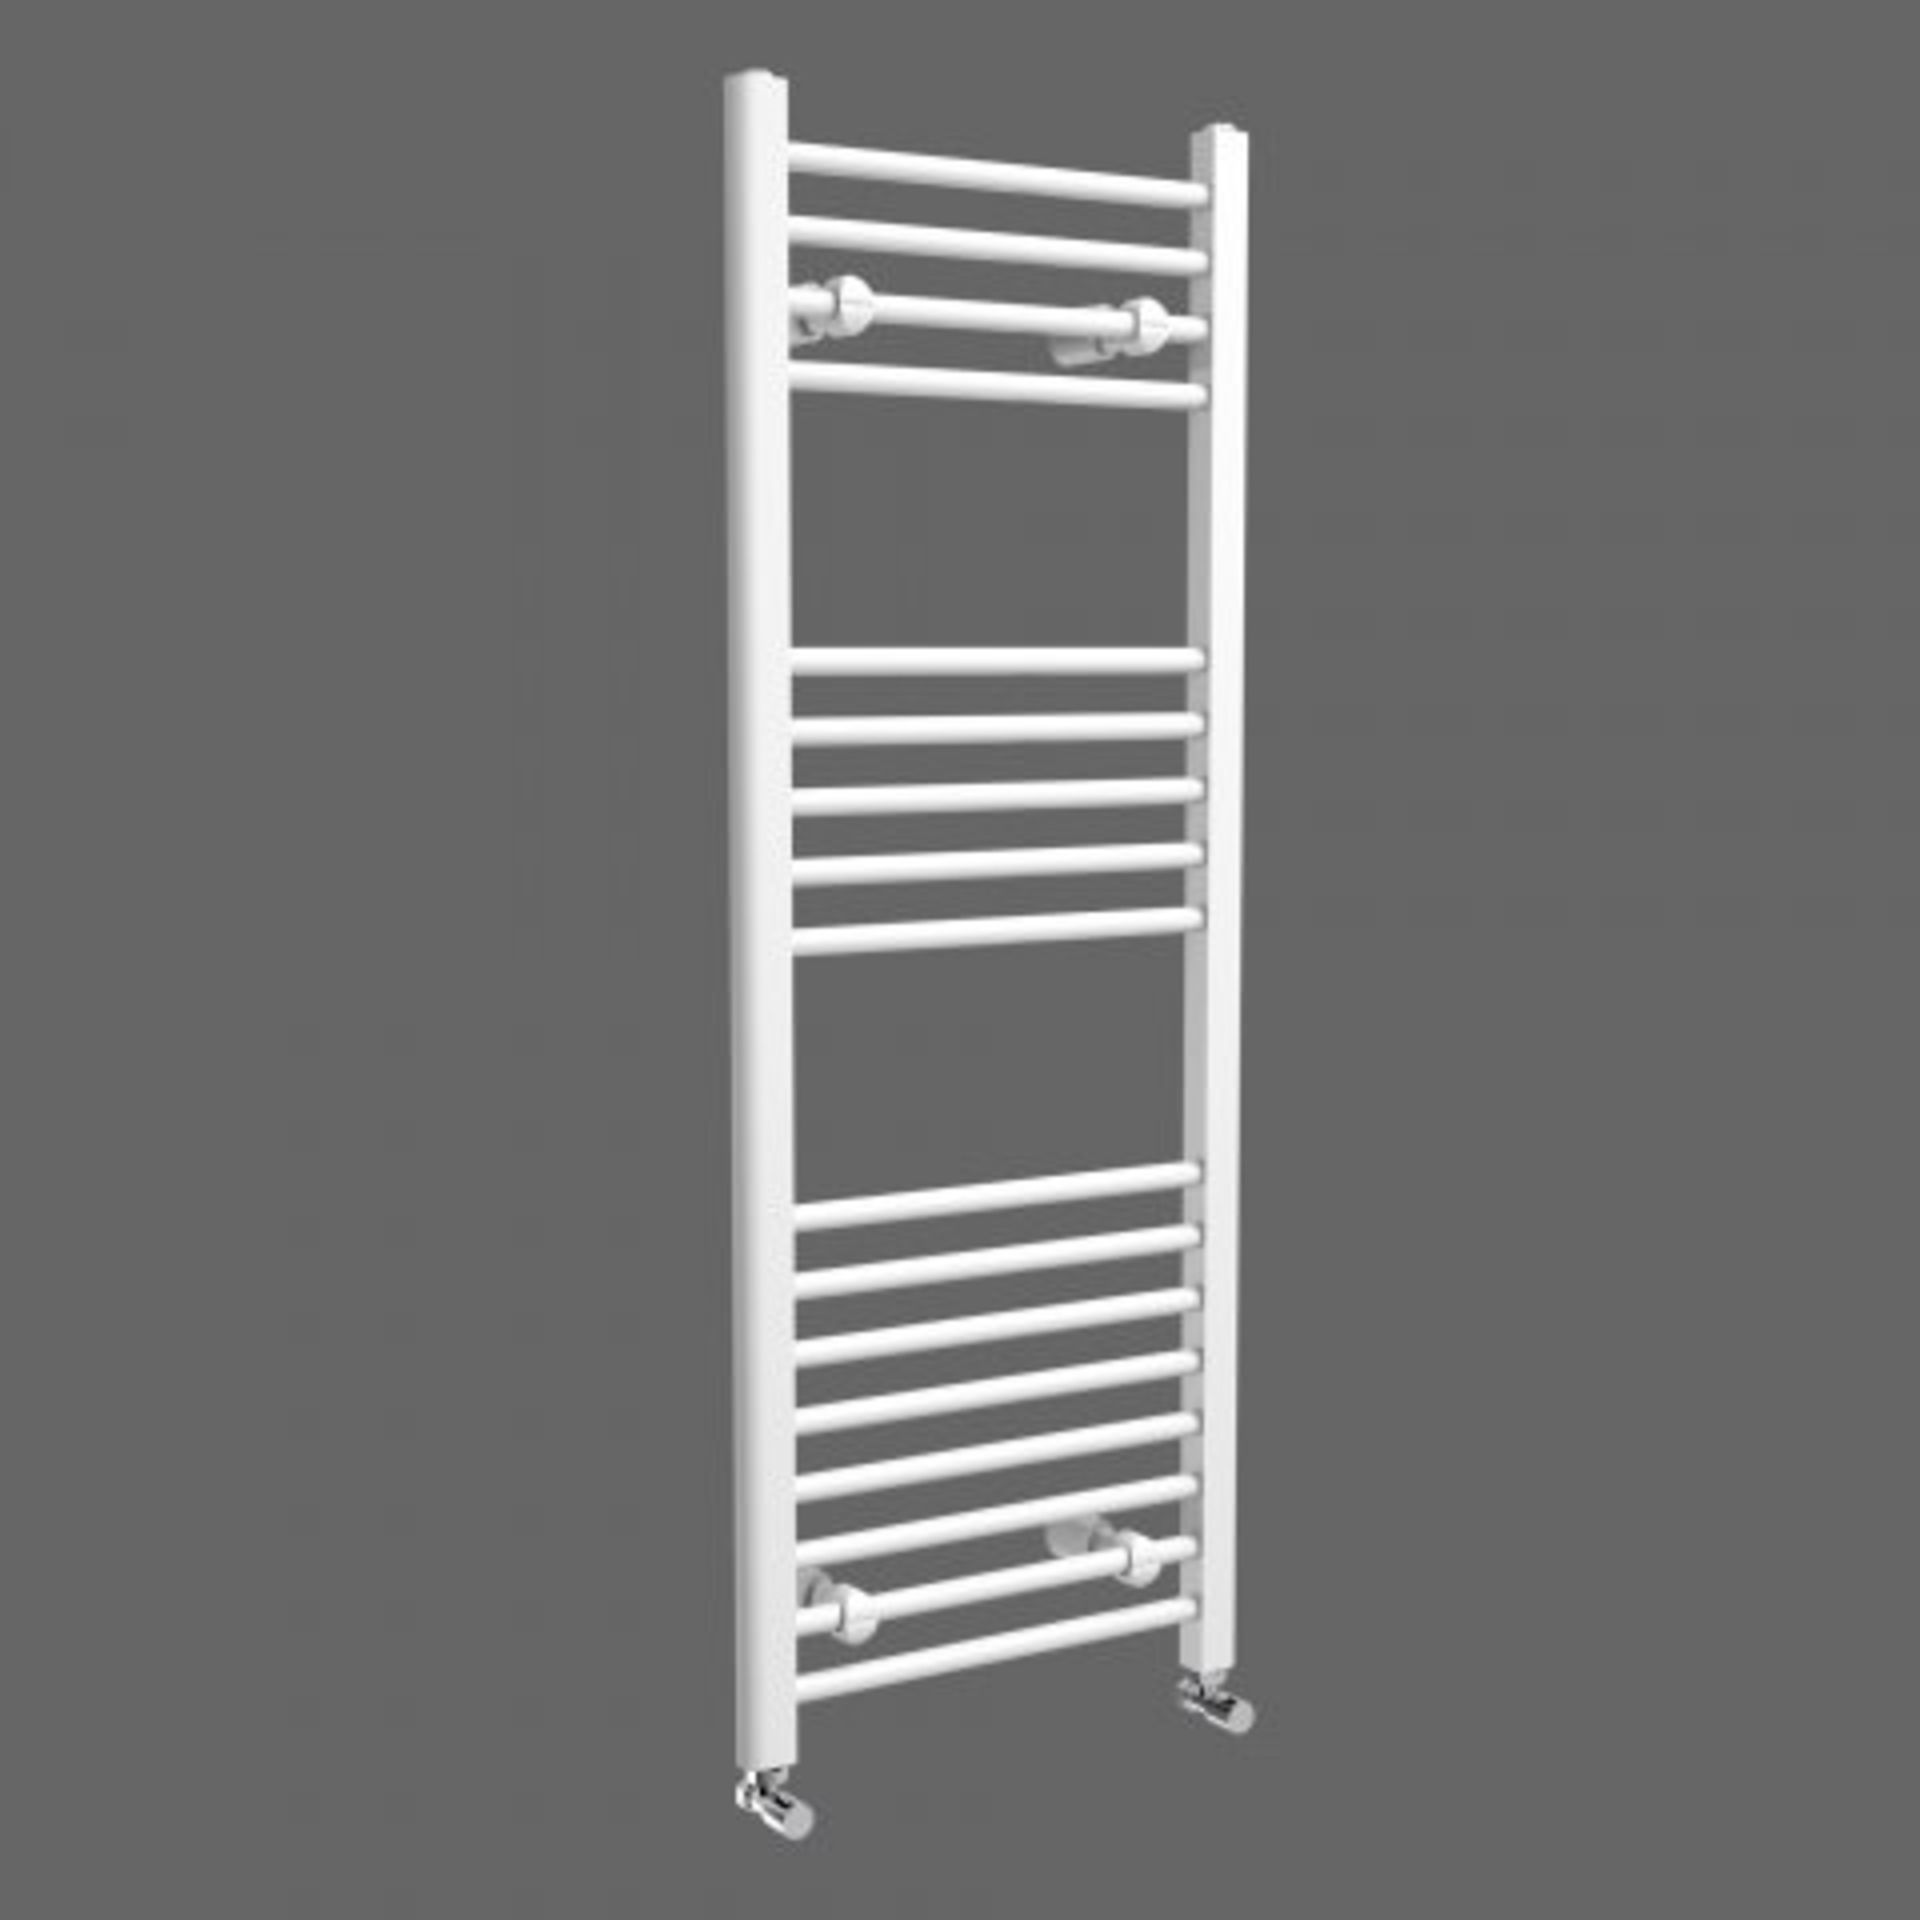 (N203) 1200x450mm White Straight Rail Ladder Towel Radiator. RRP £249.99. What heat output do I need - Image 3 of 6